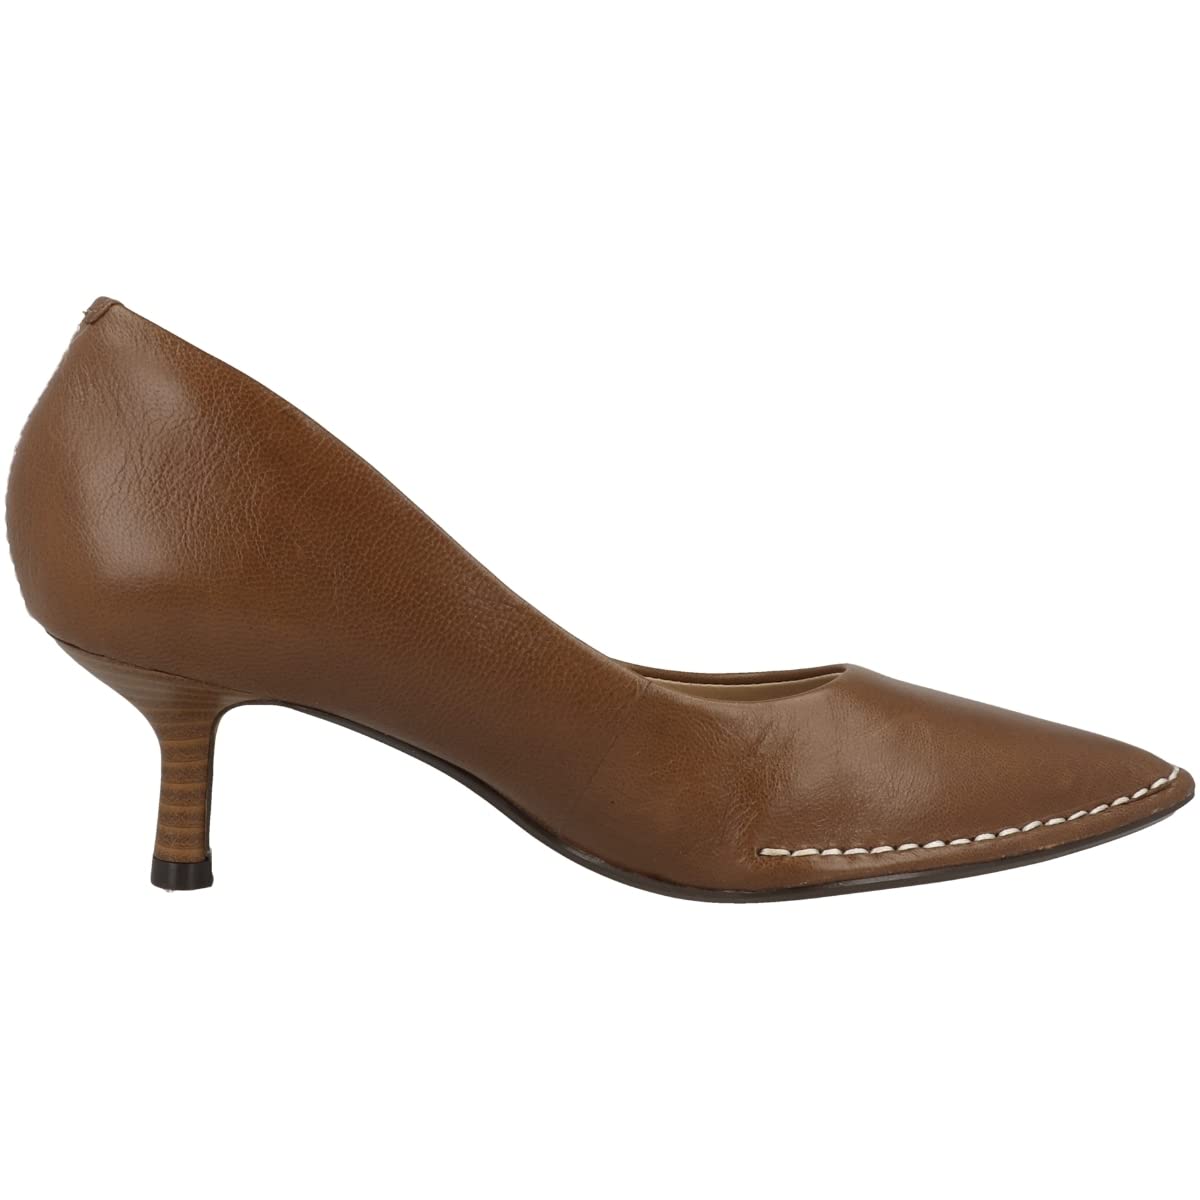 Clarks Women's Tan Leather Court Shoes 